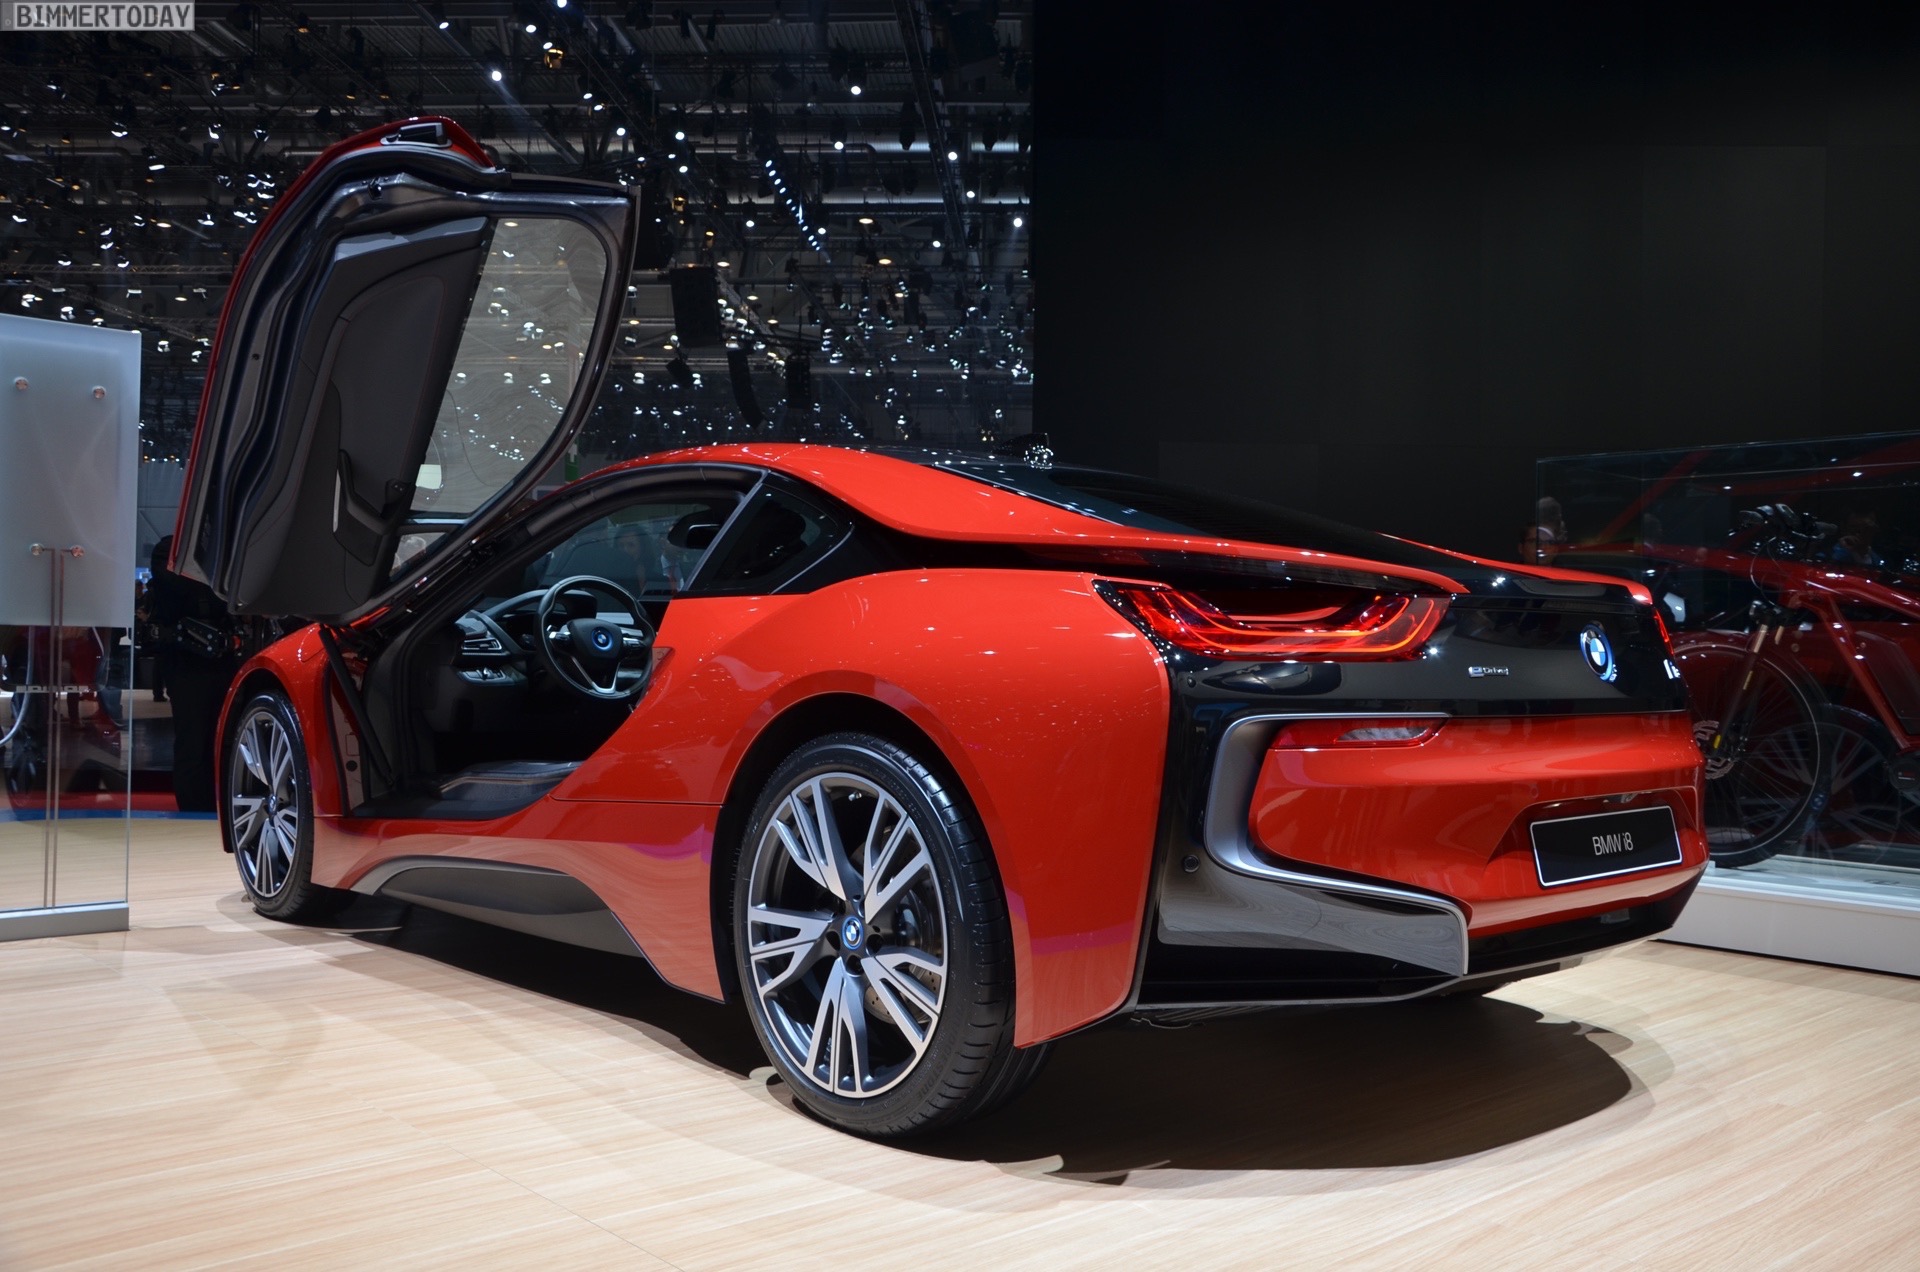 Motor Show: BMW i8 Red Edition makes world debut